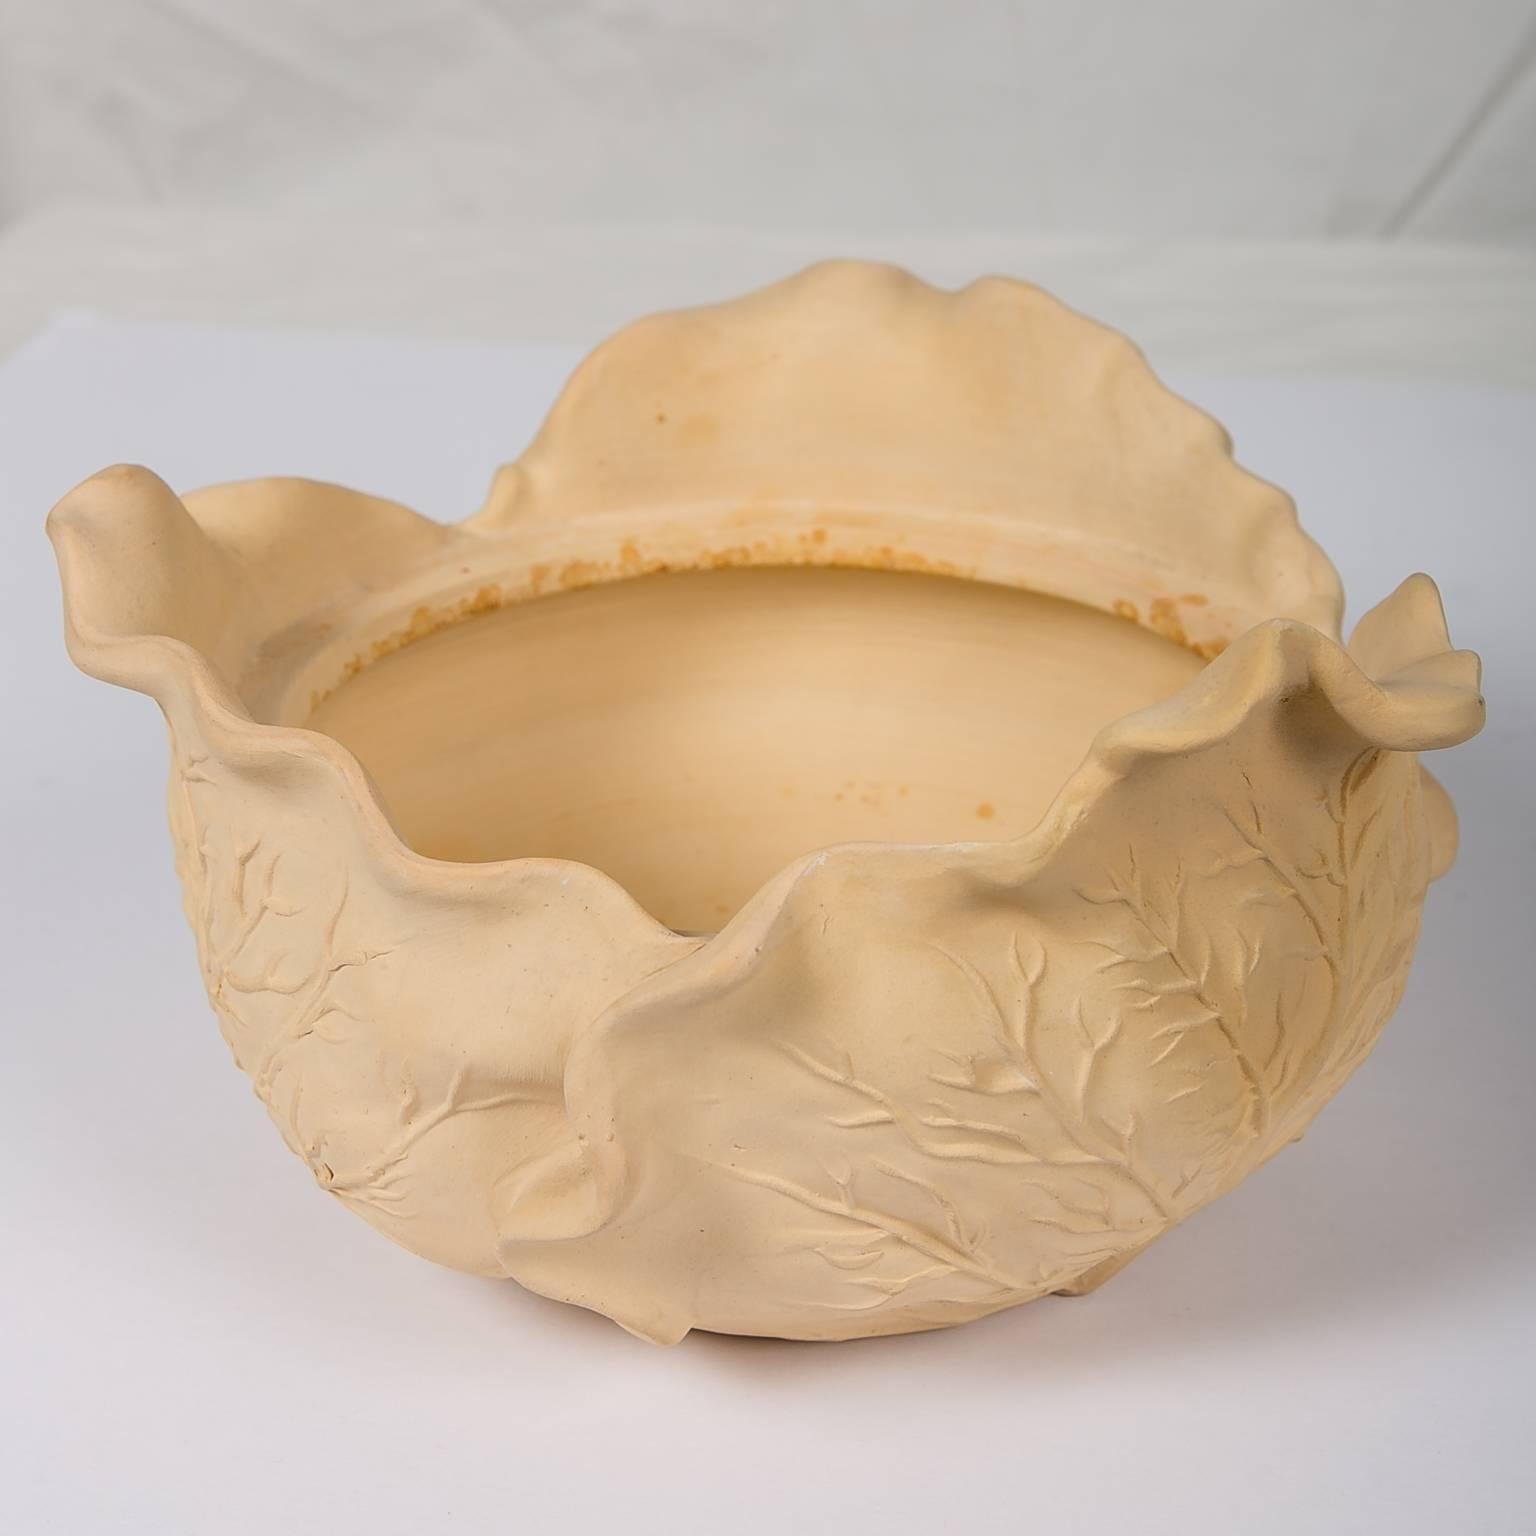  Game Pie Dish Decorated with Four Rabbits by William Schiller & Sons circa 1880 1